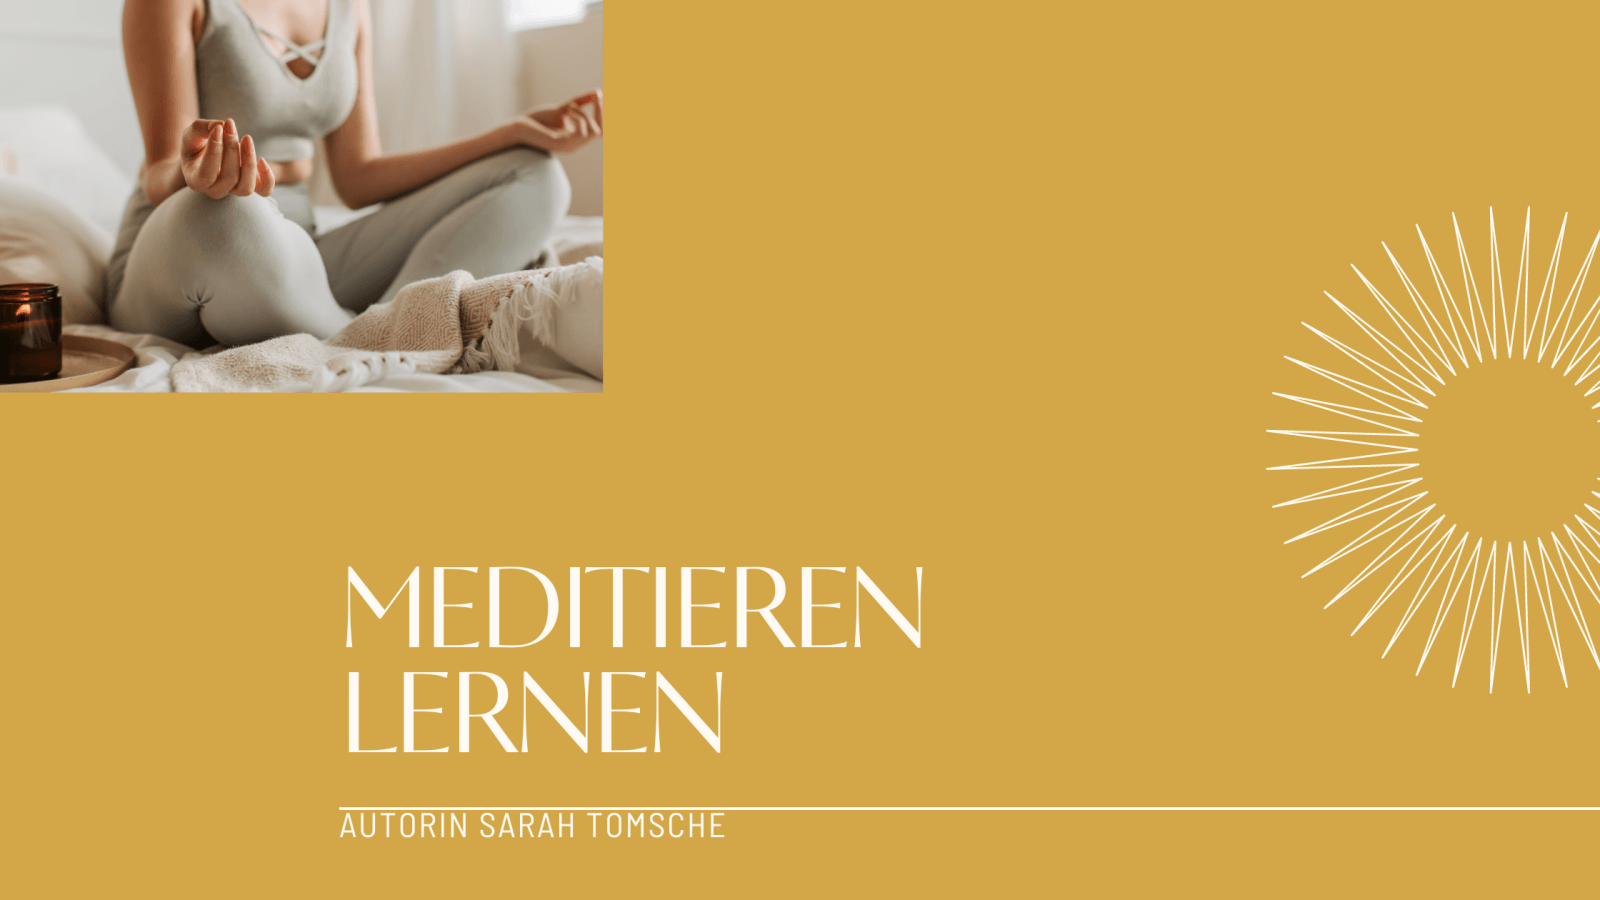 You are currently viewing Meditieren lernen